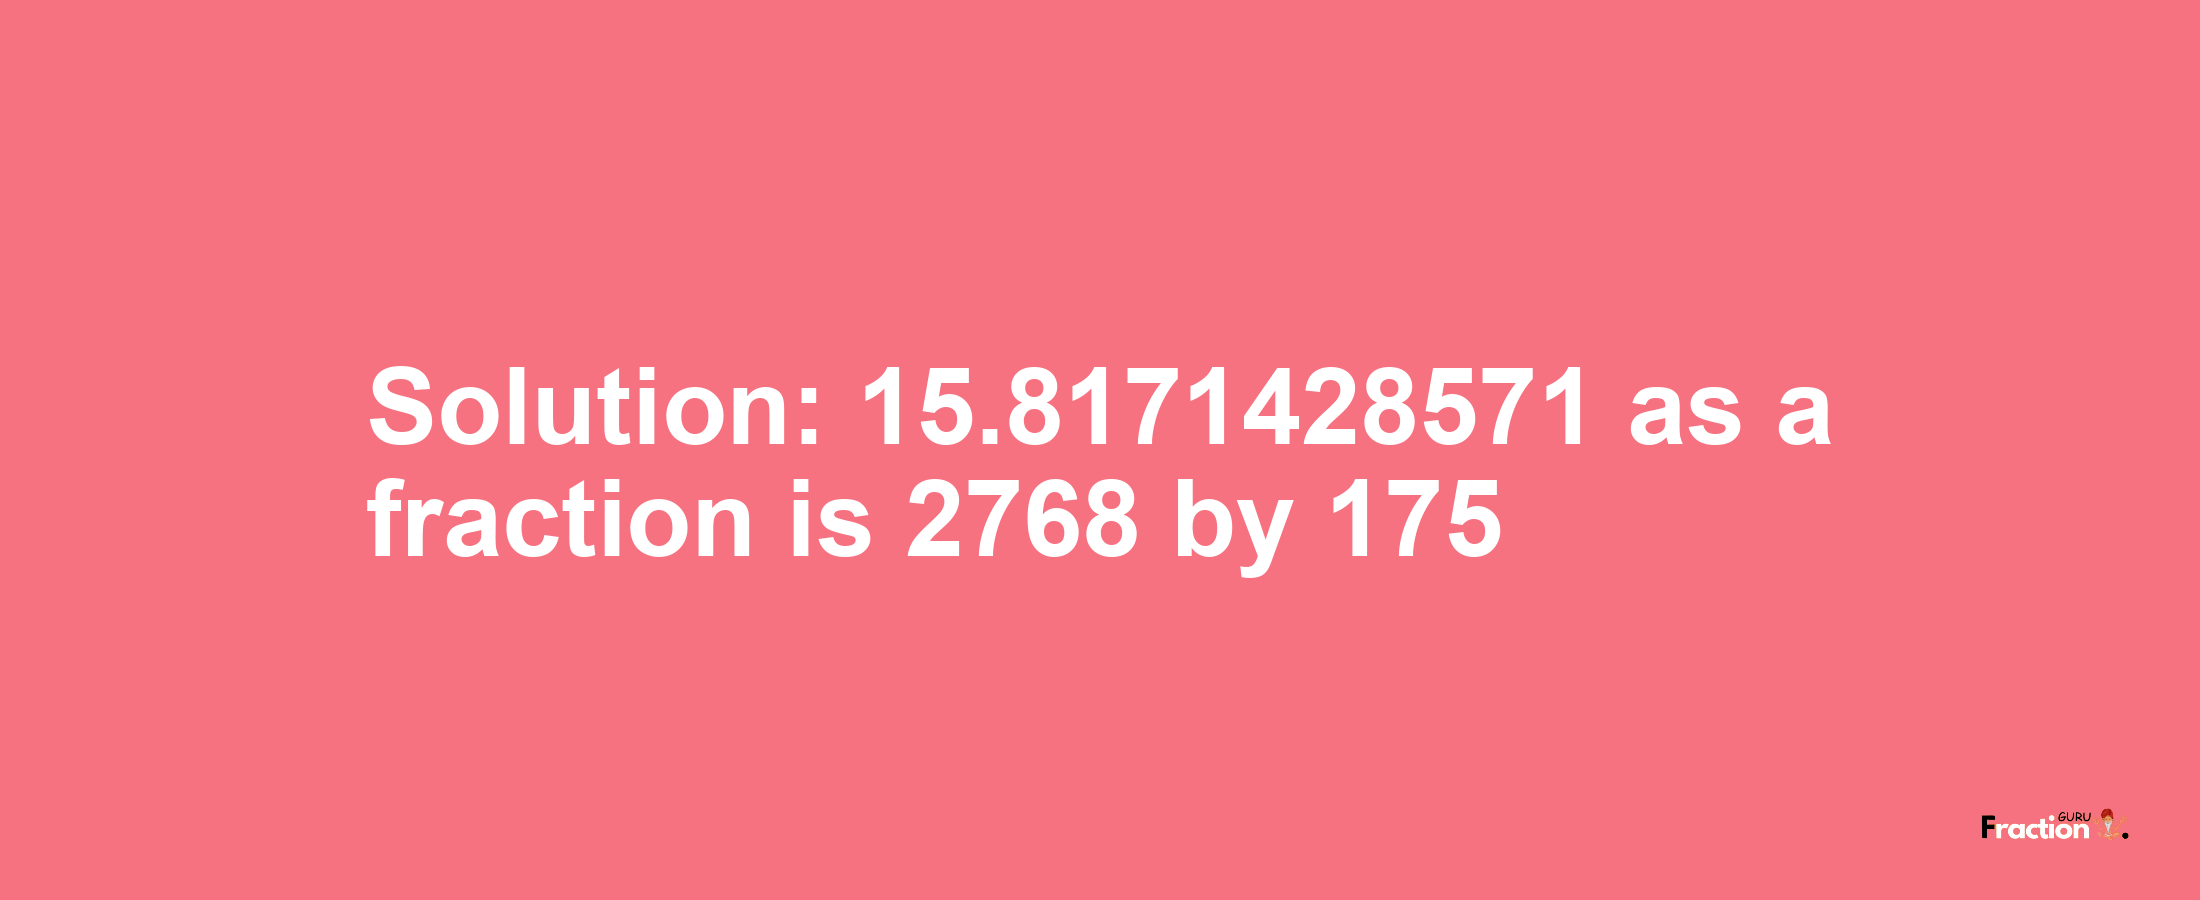 Solution:15.8171428571 as a fraction is 2768/175